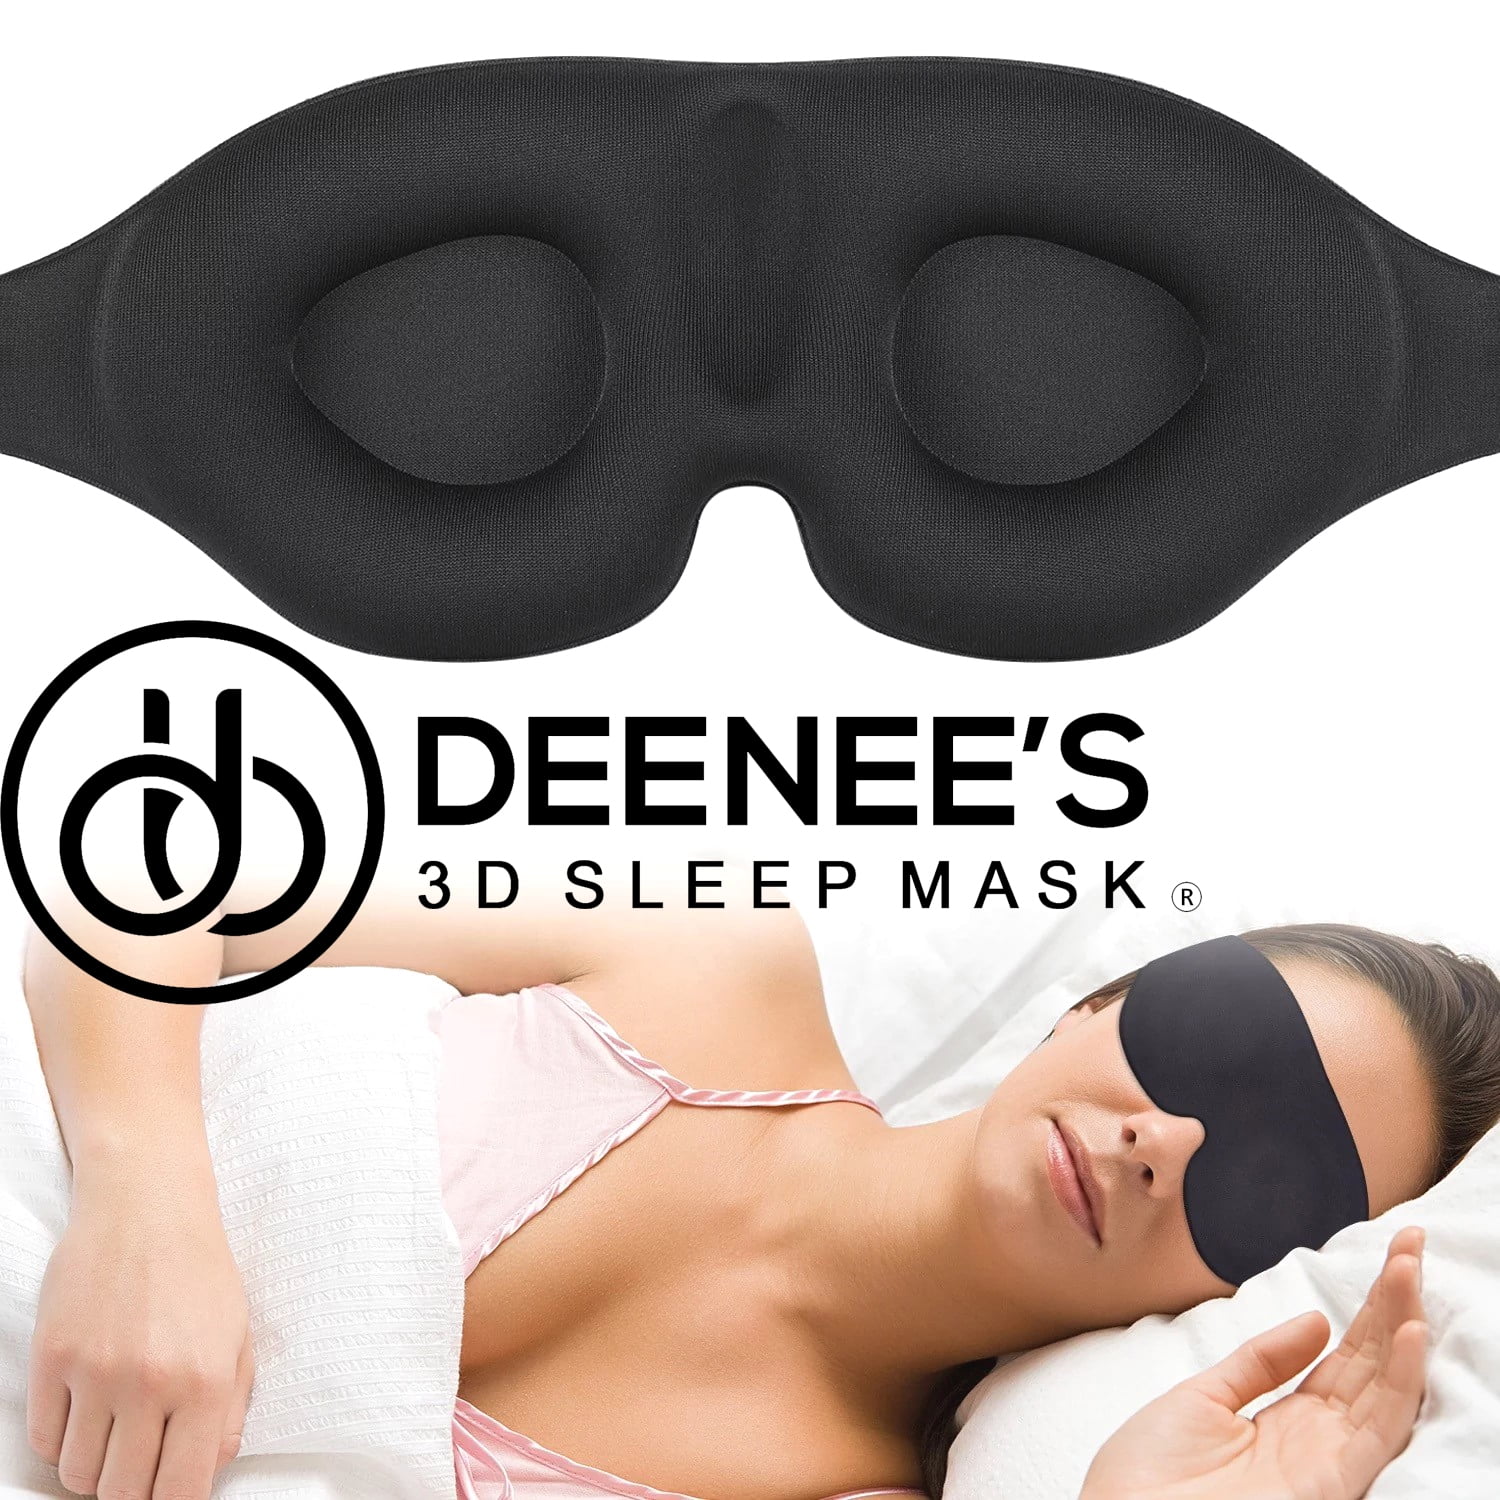 Deenee's Sleep Mask for Women and Men, Eye Mask for Sleeping, Eye Cover  Blackout Masks, Weighted Sleeping Pad, Black Blindfold, Travel Accessories